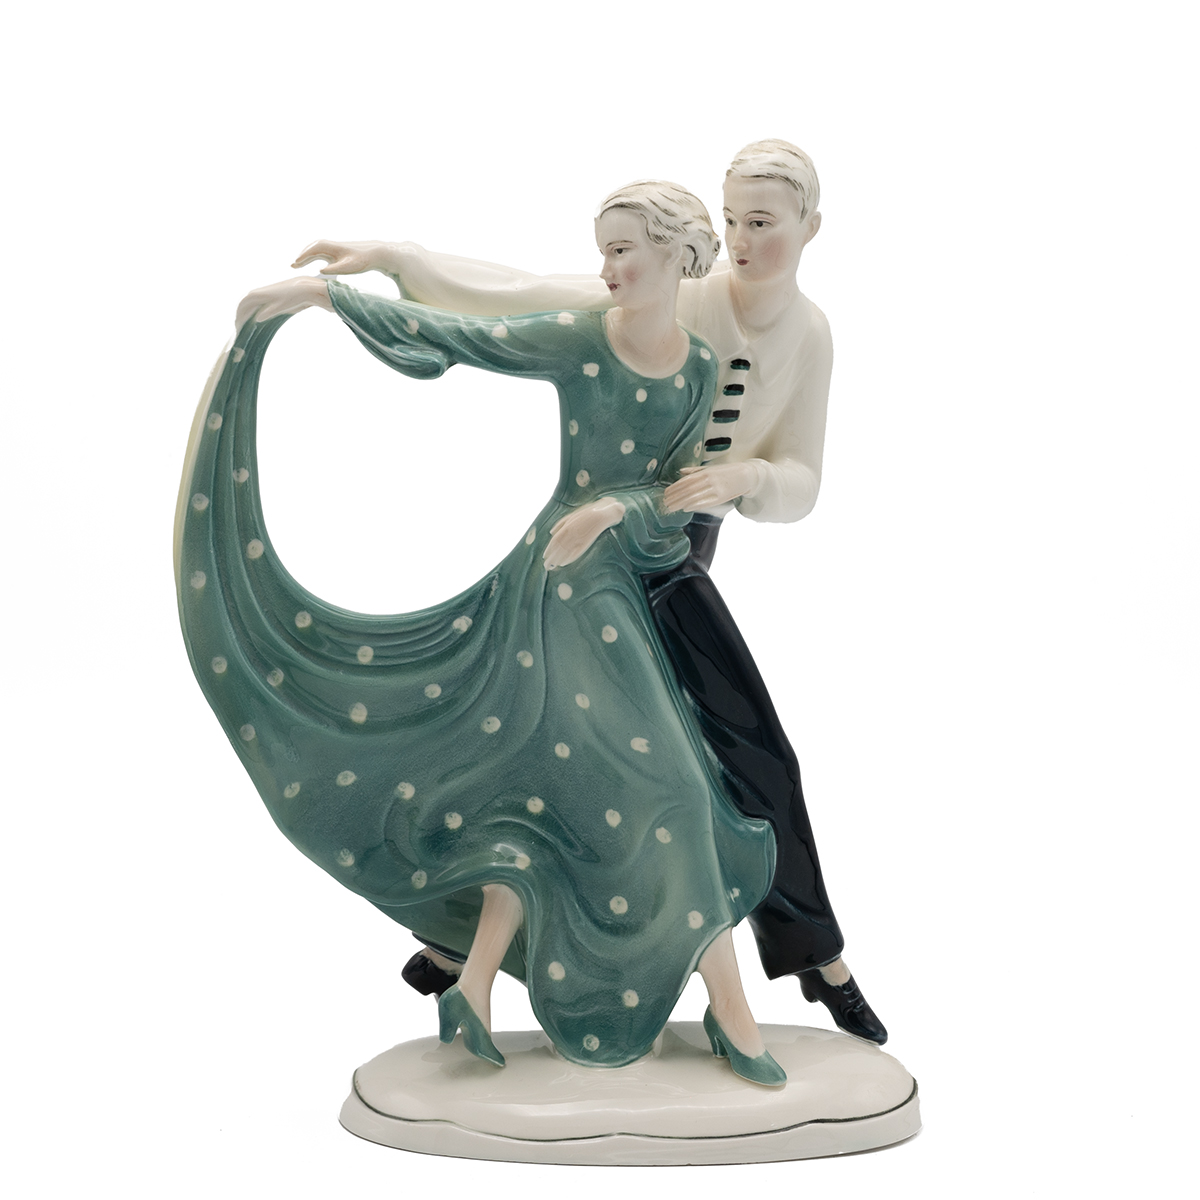 Katzhutte Hertwig & Co porcelain (Thuringia, Germany) - Dancing Couple, circa 1920 to 1930. Art D...